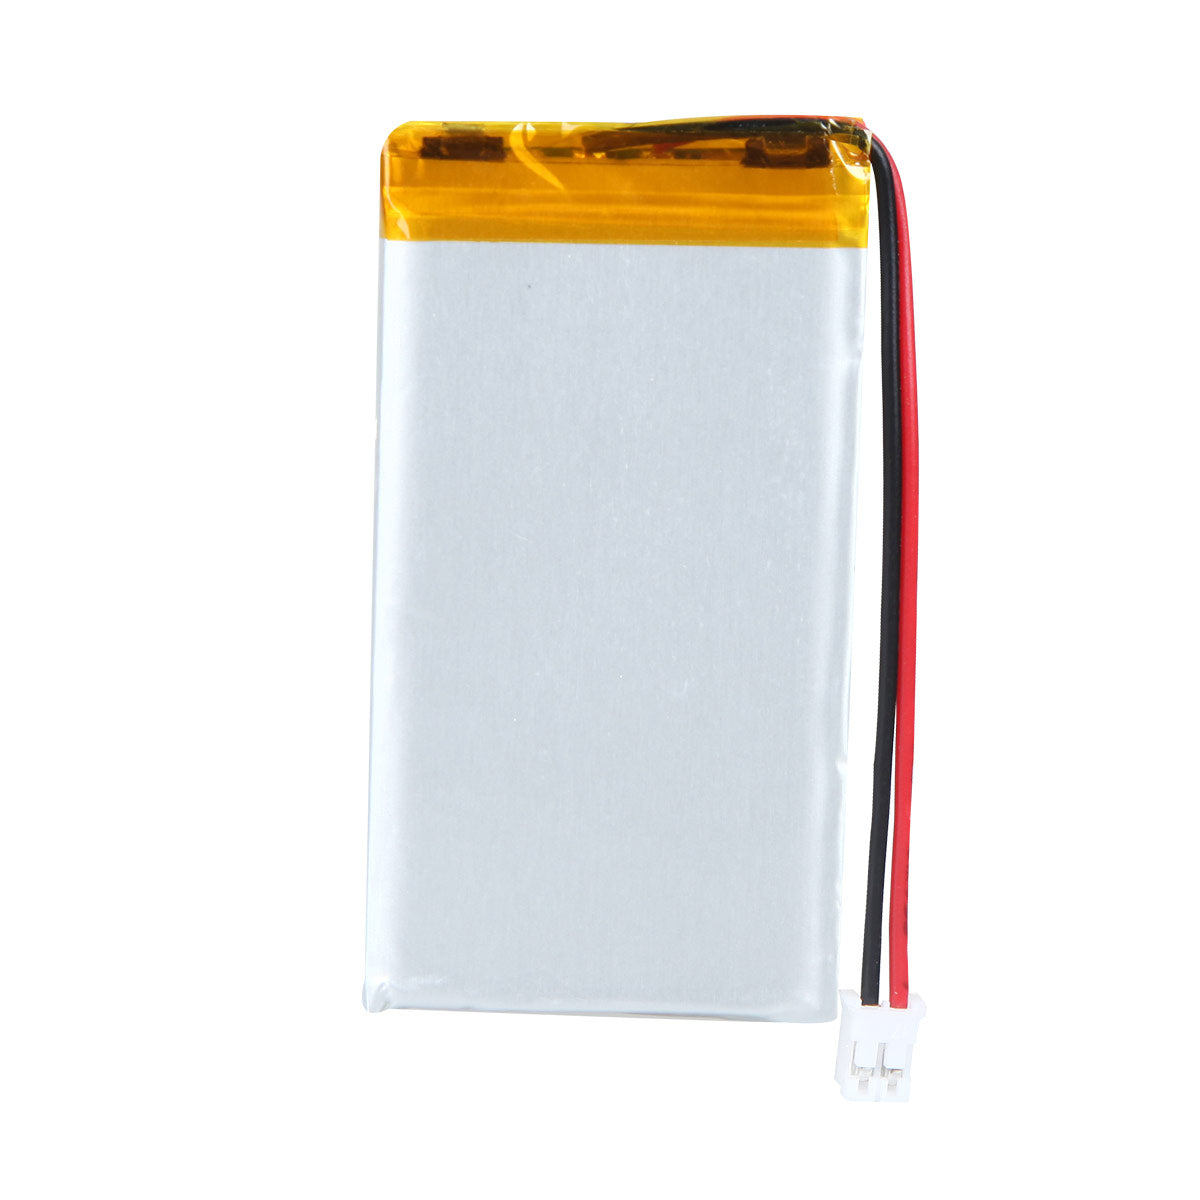 YDL 3.7V 1500mAh 563567 Rechargeable Lithium Polymer Battery Length 69mm